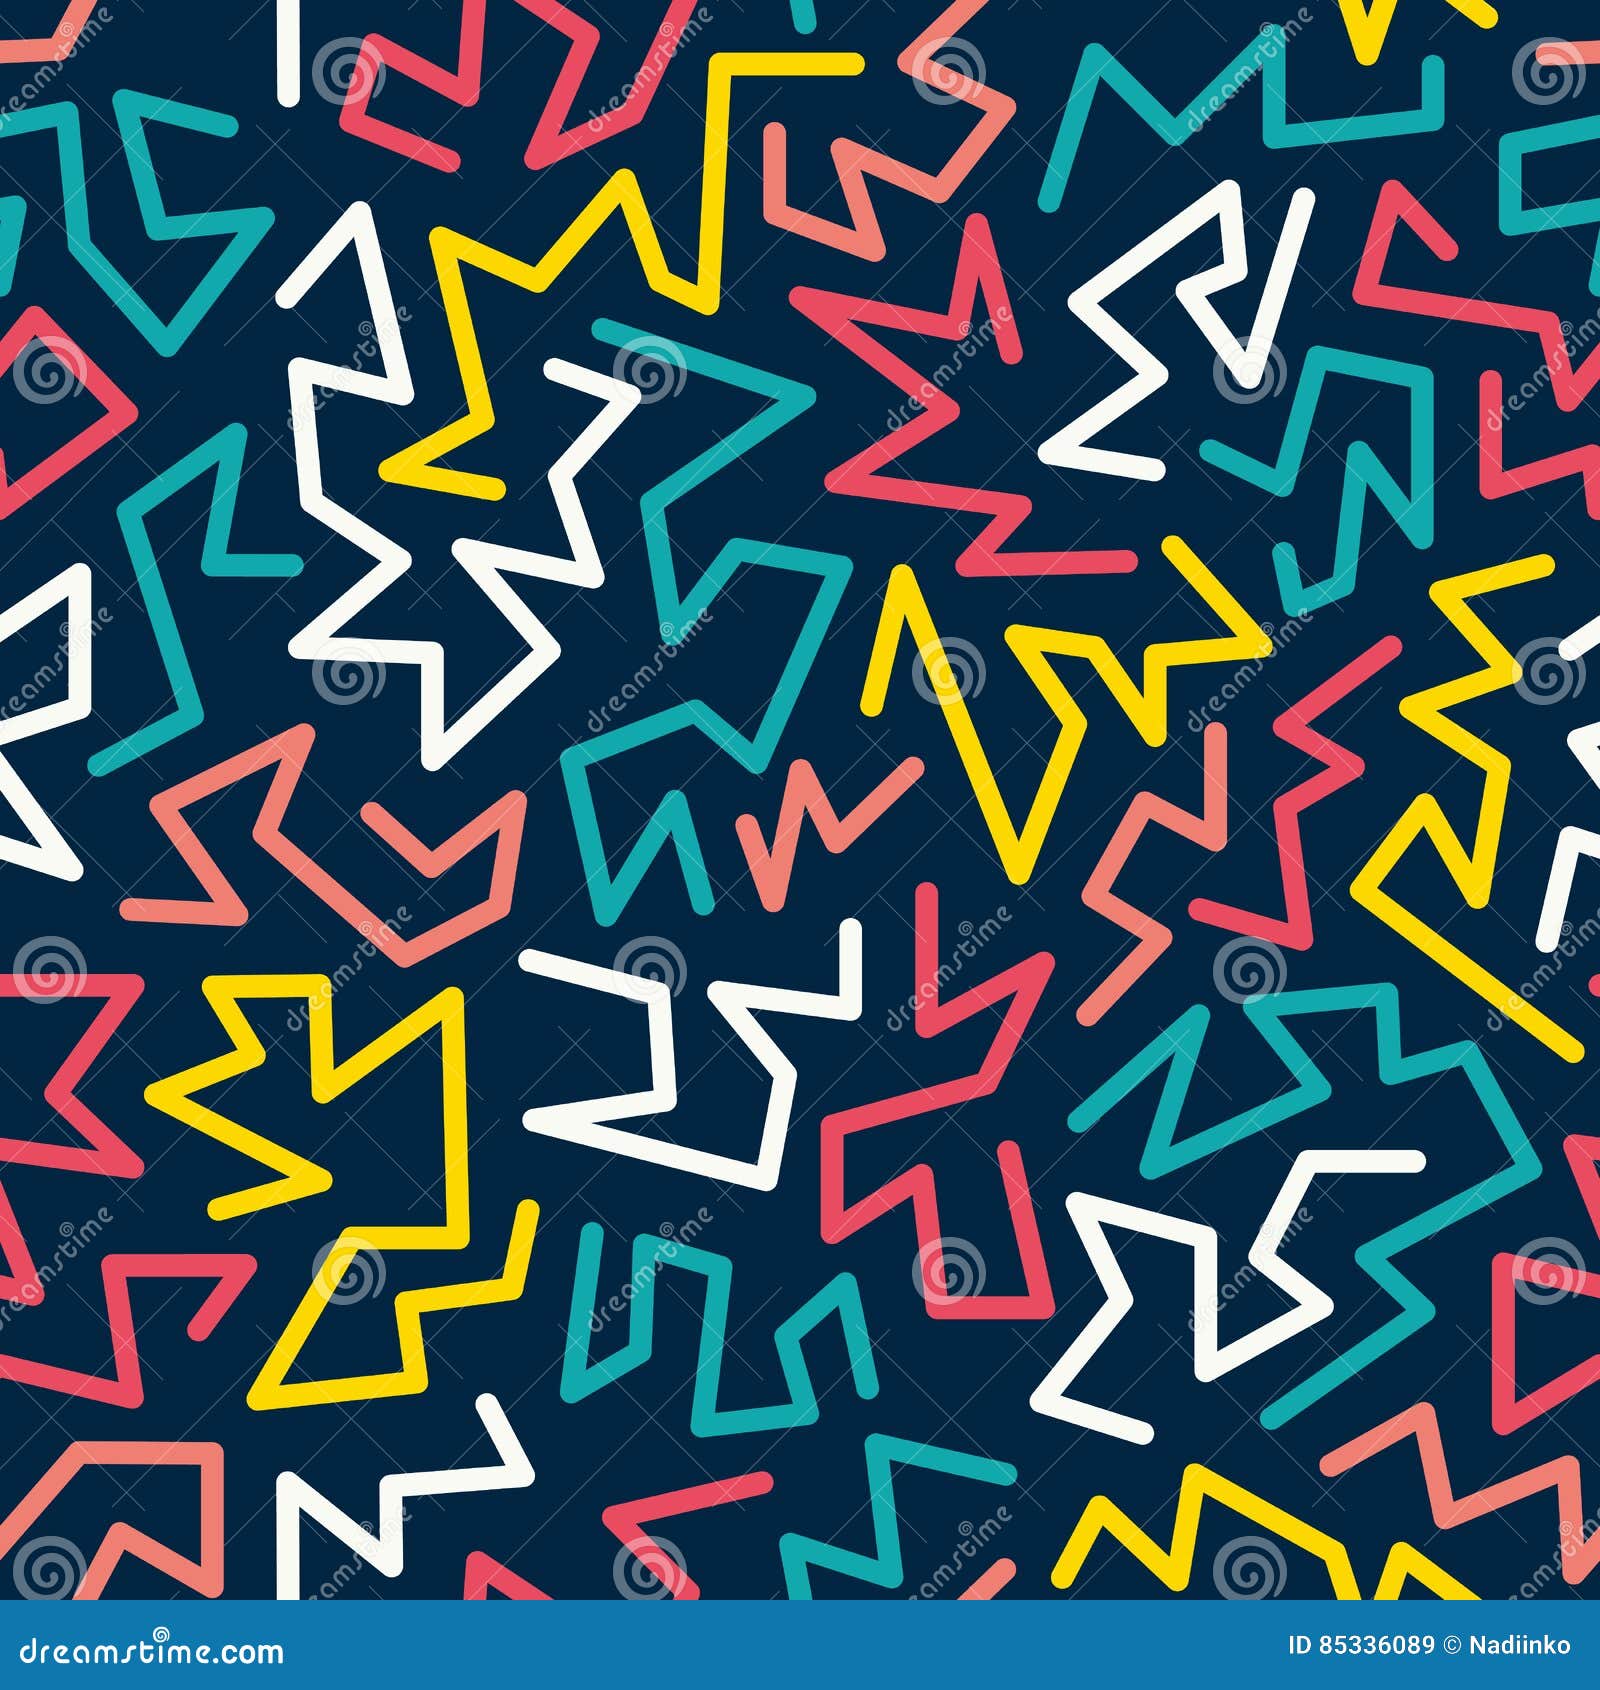 trendy memphis style seamless pattern inspired by 80s, 90s retro fashion . colorful festive hipster background